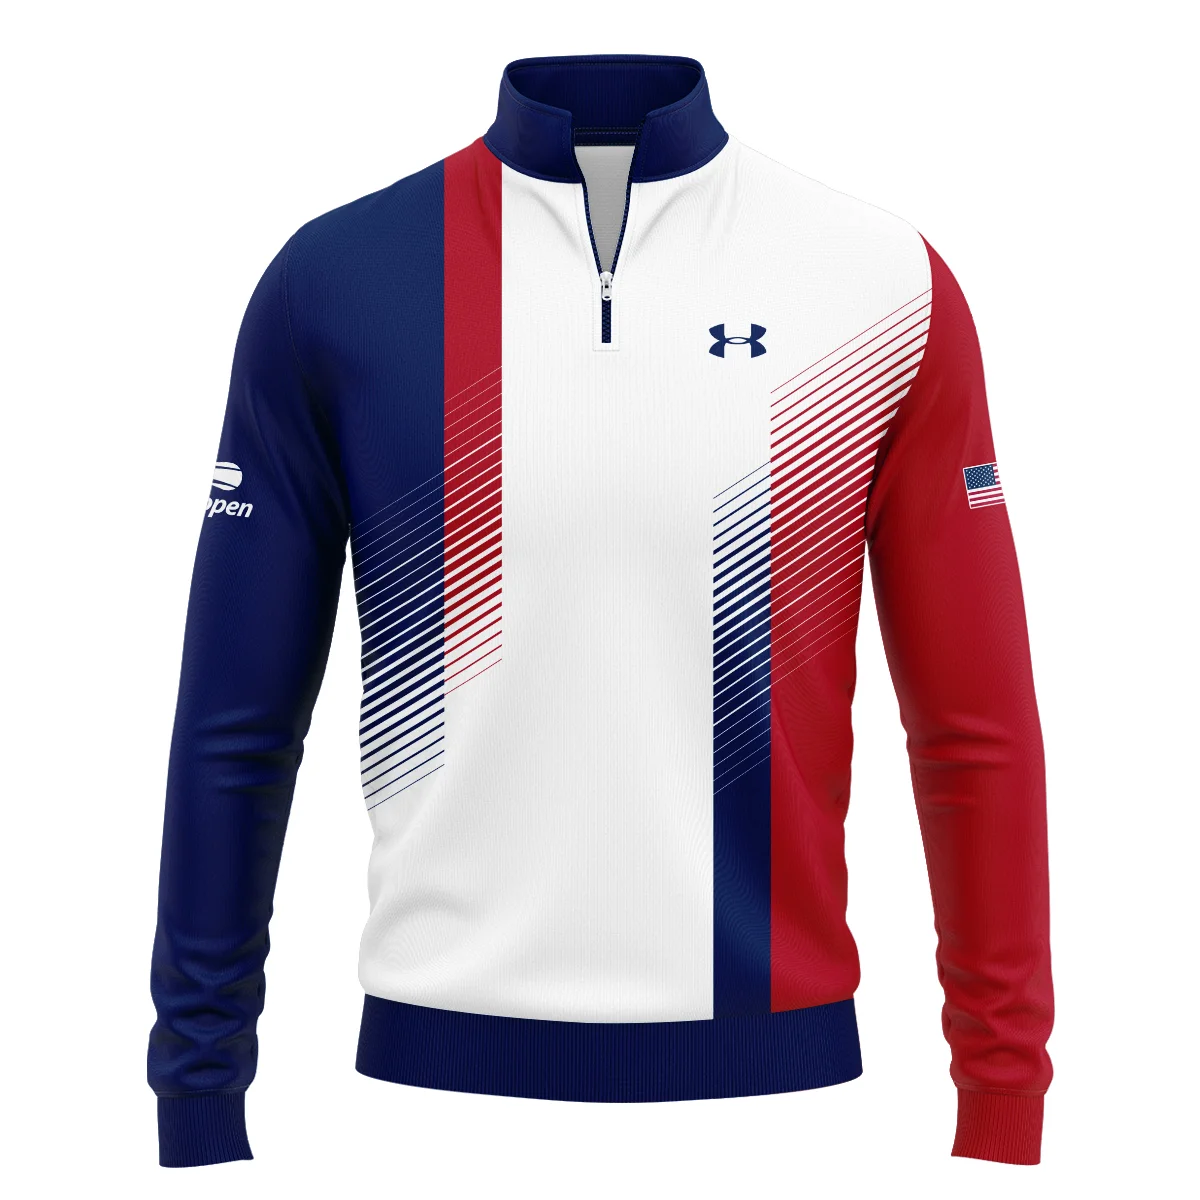 Under Armour Blue Red Straight Line White US Open Tennis Champions Hoodie Shirt Style Classic Hoodie Shirt